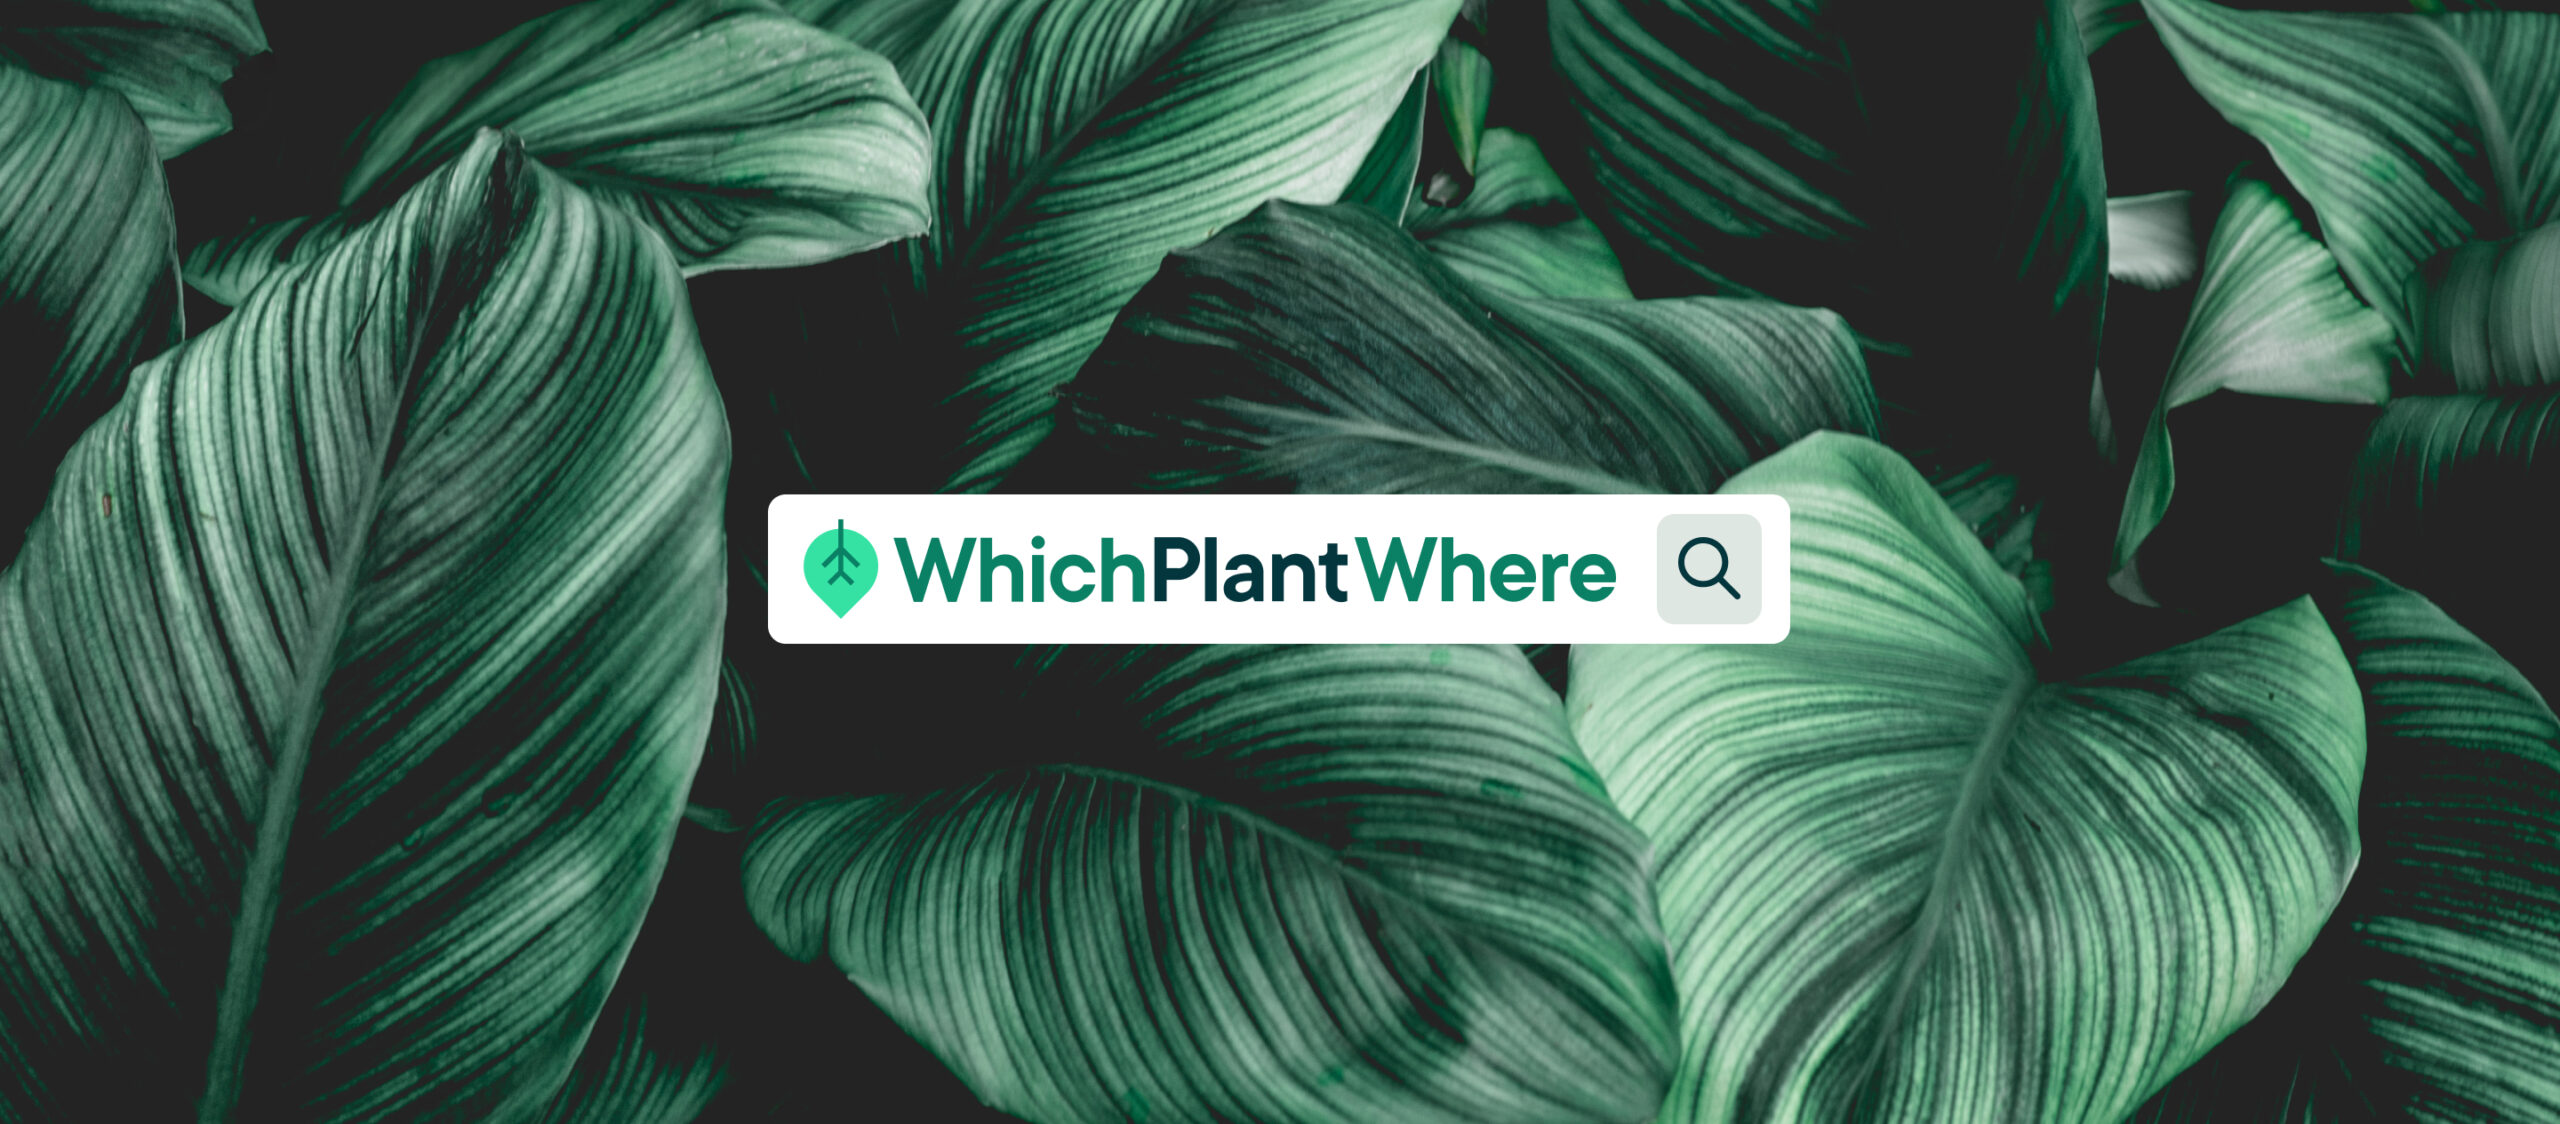 Which Plant Where logo in search bar with green plants as background